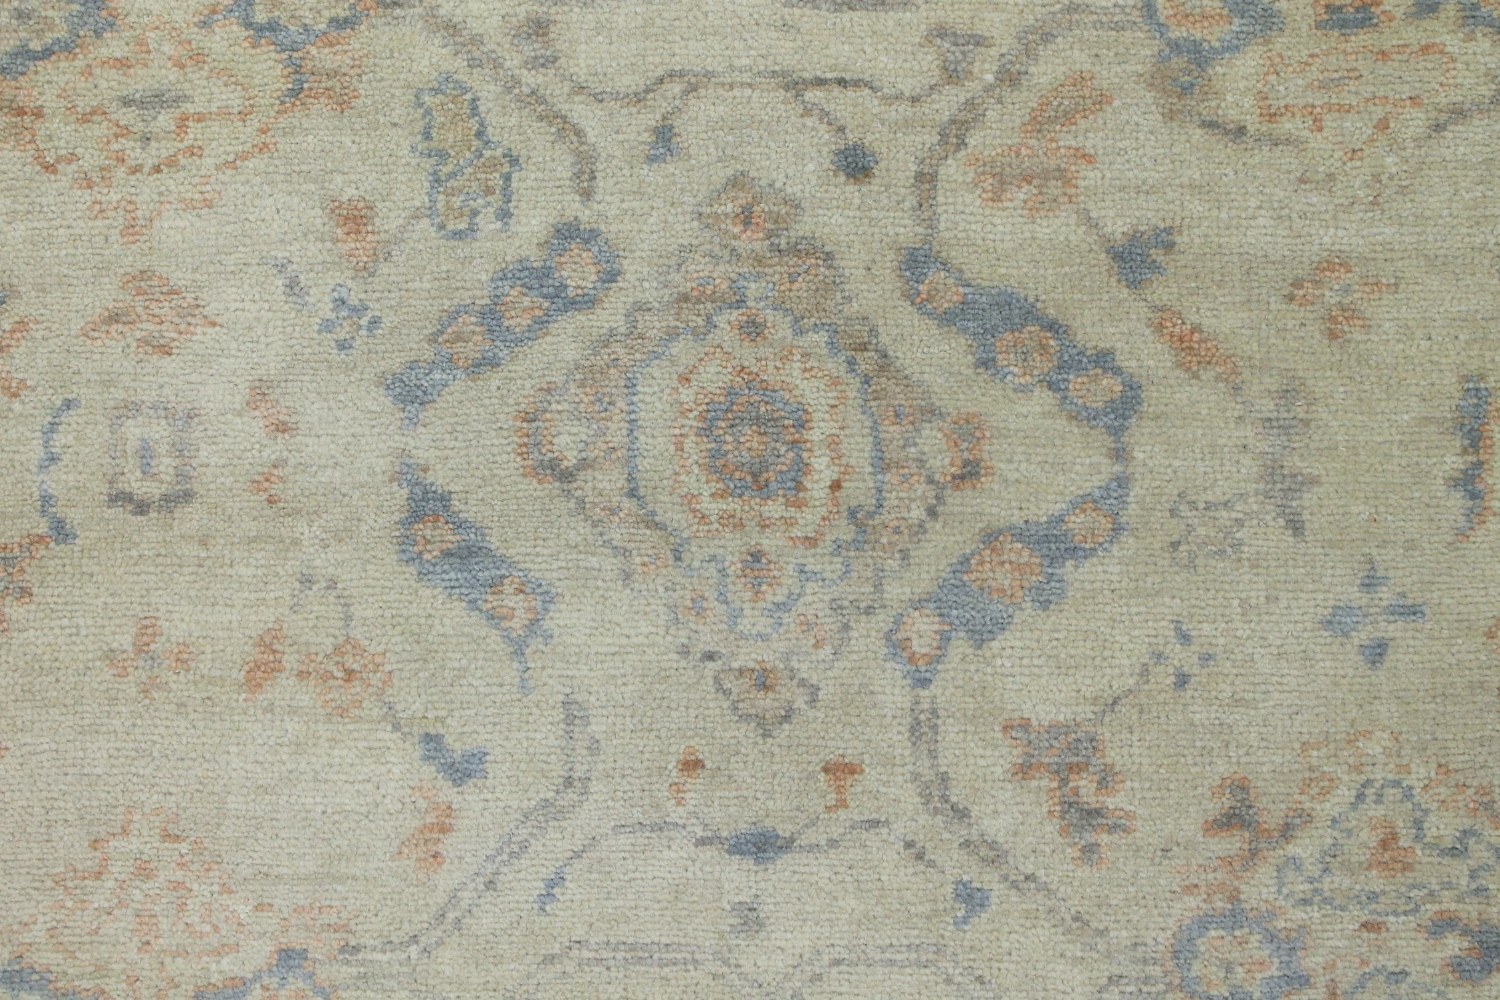 4x6 Oushak Hand Knotted Wool Area Rug - MR19535